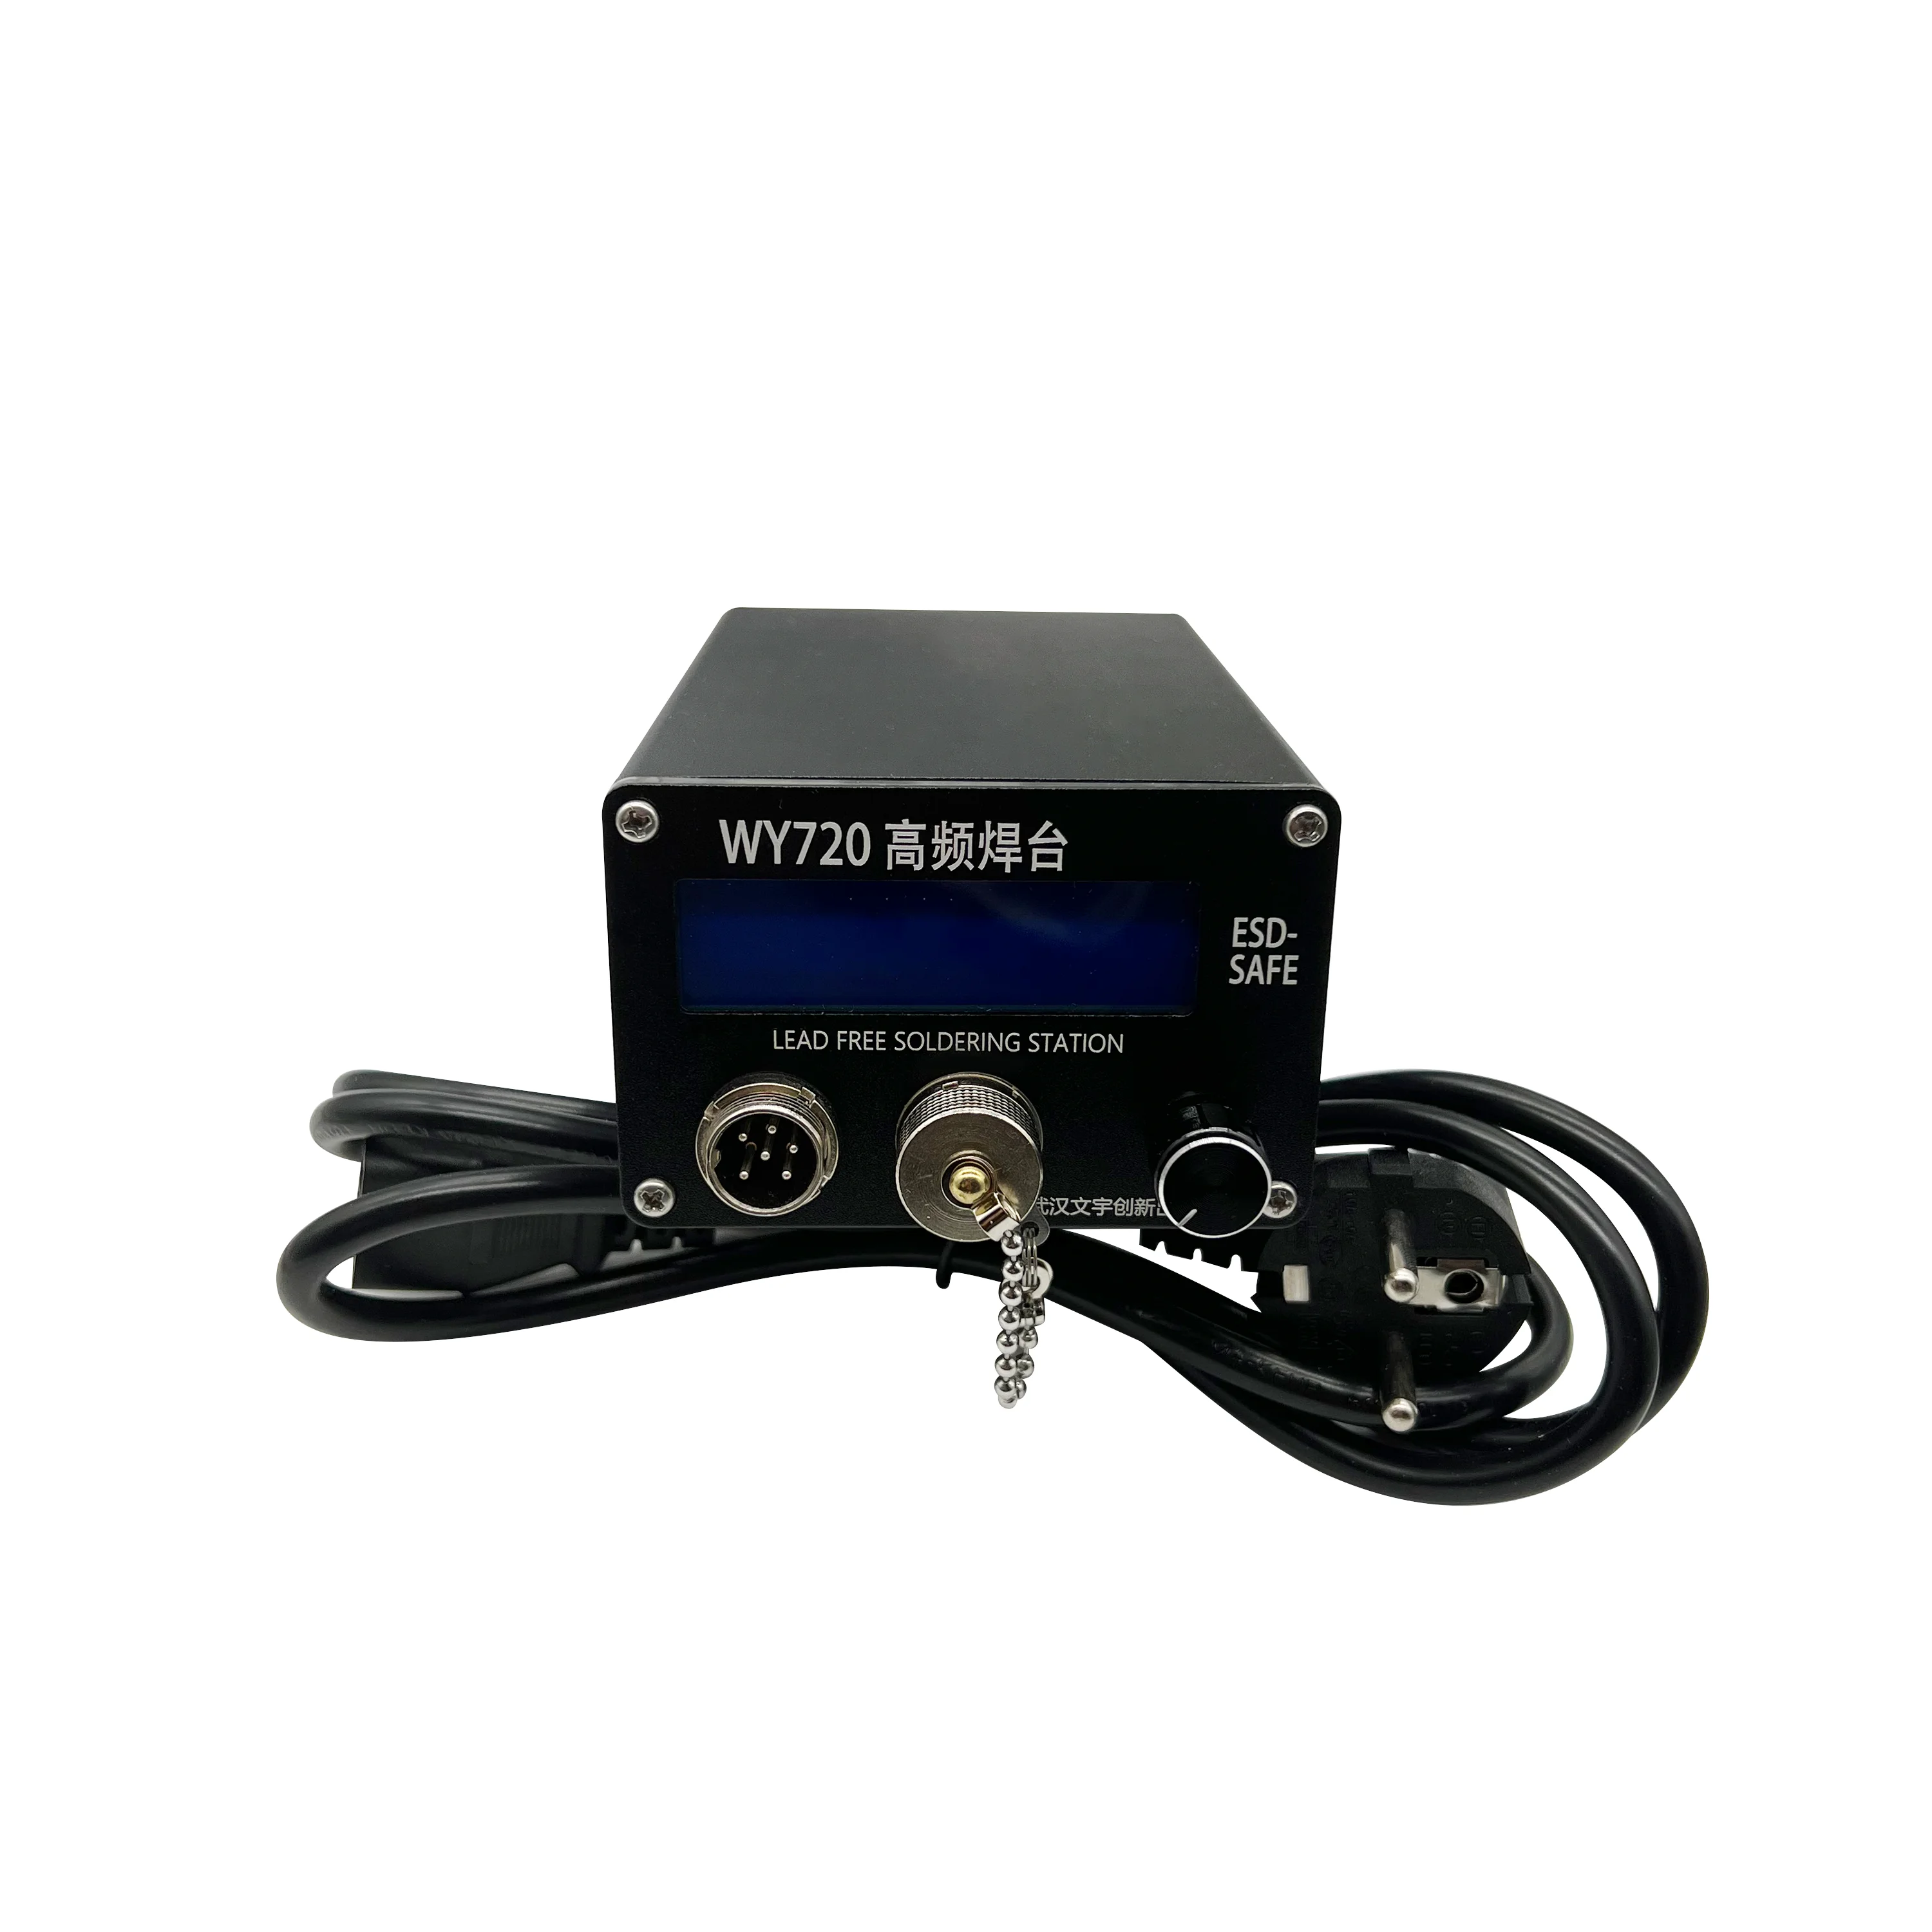 WY720 Solder Station Kit Electric Solder iron LED Digital Display Rework Station With Soldering Tips Welding tools English